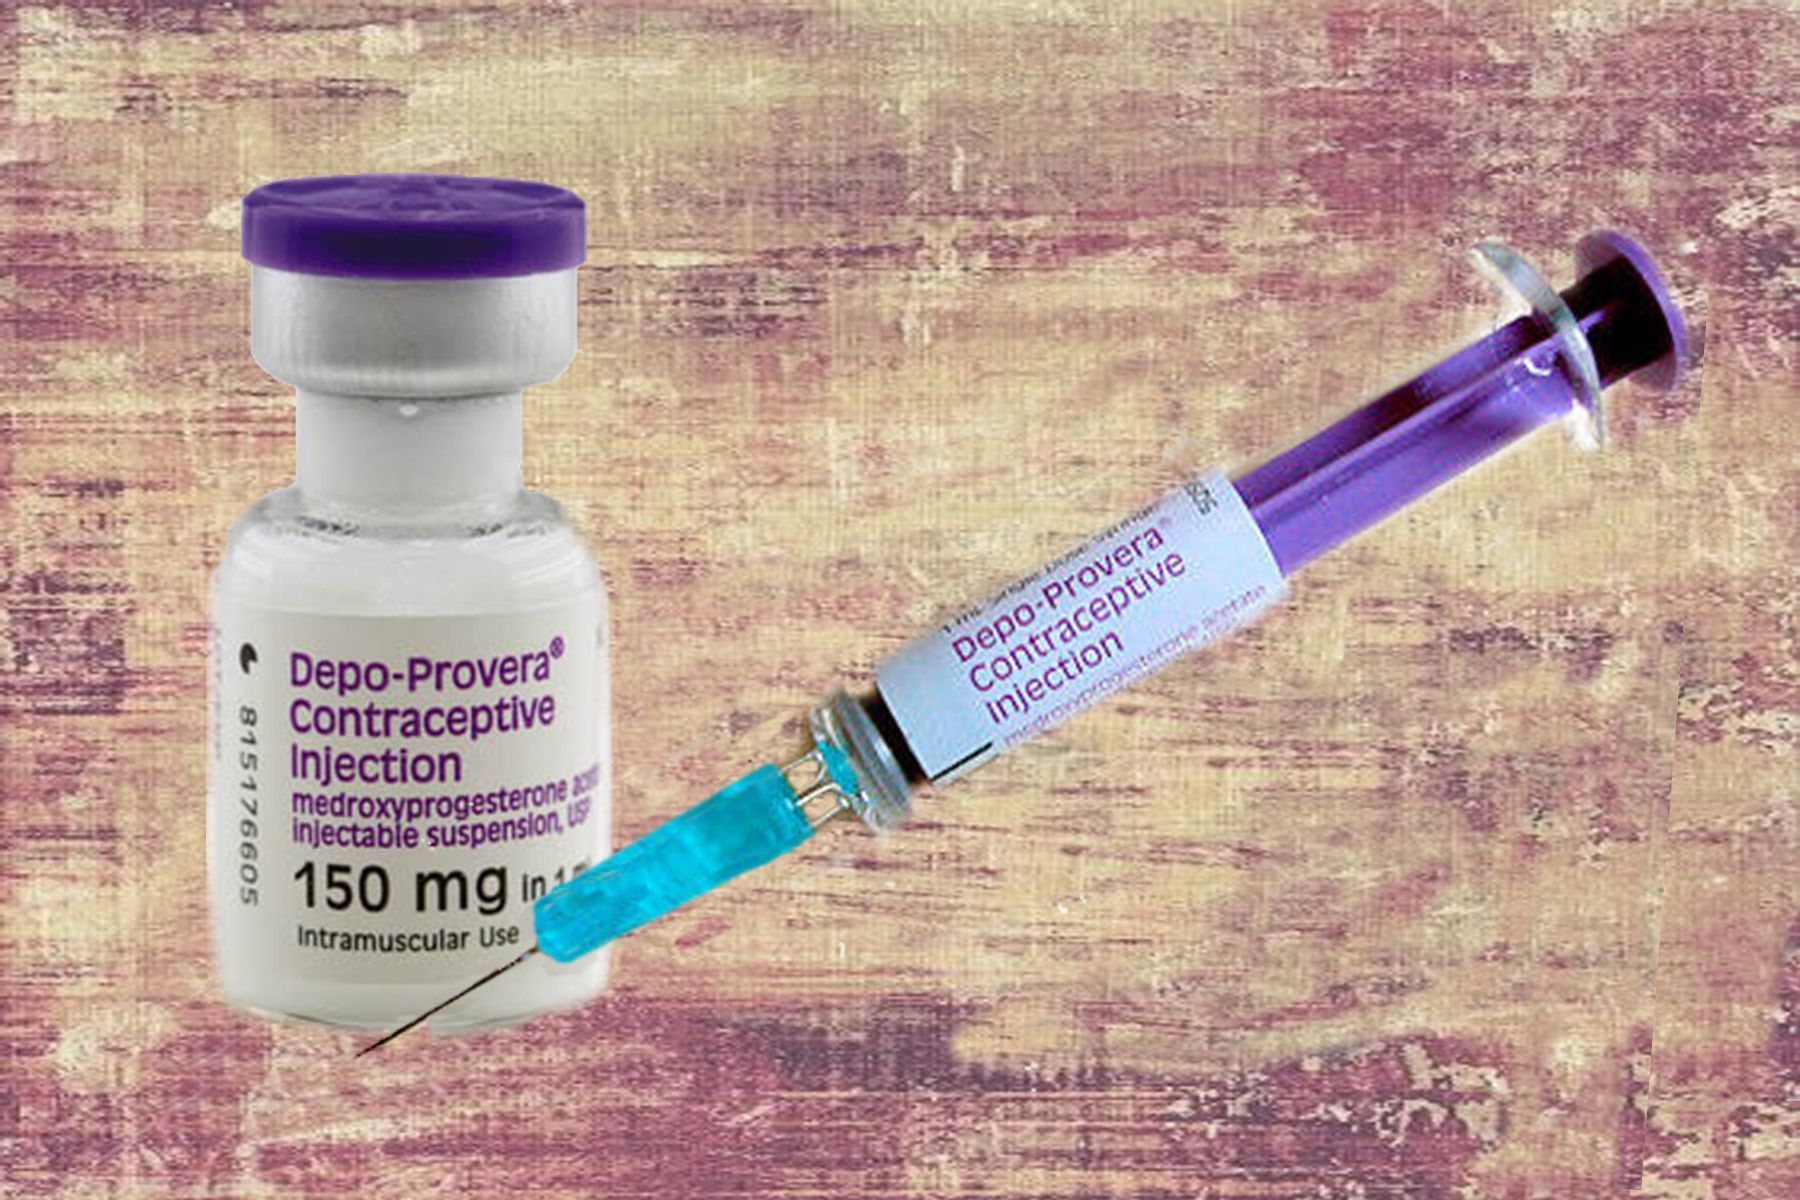 Your First Year Of Depo-Provera Use